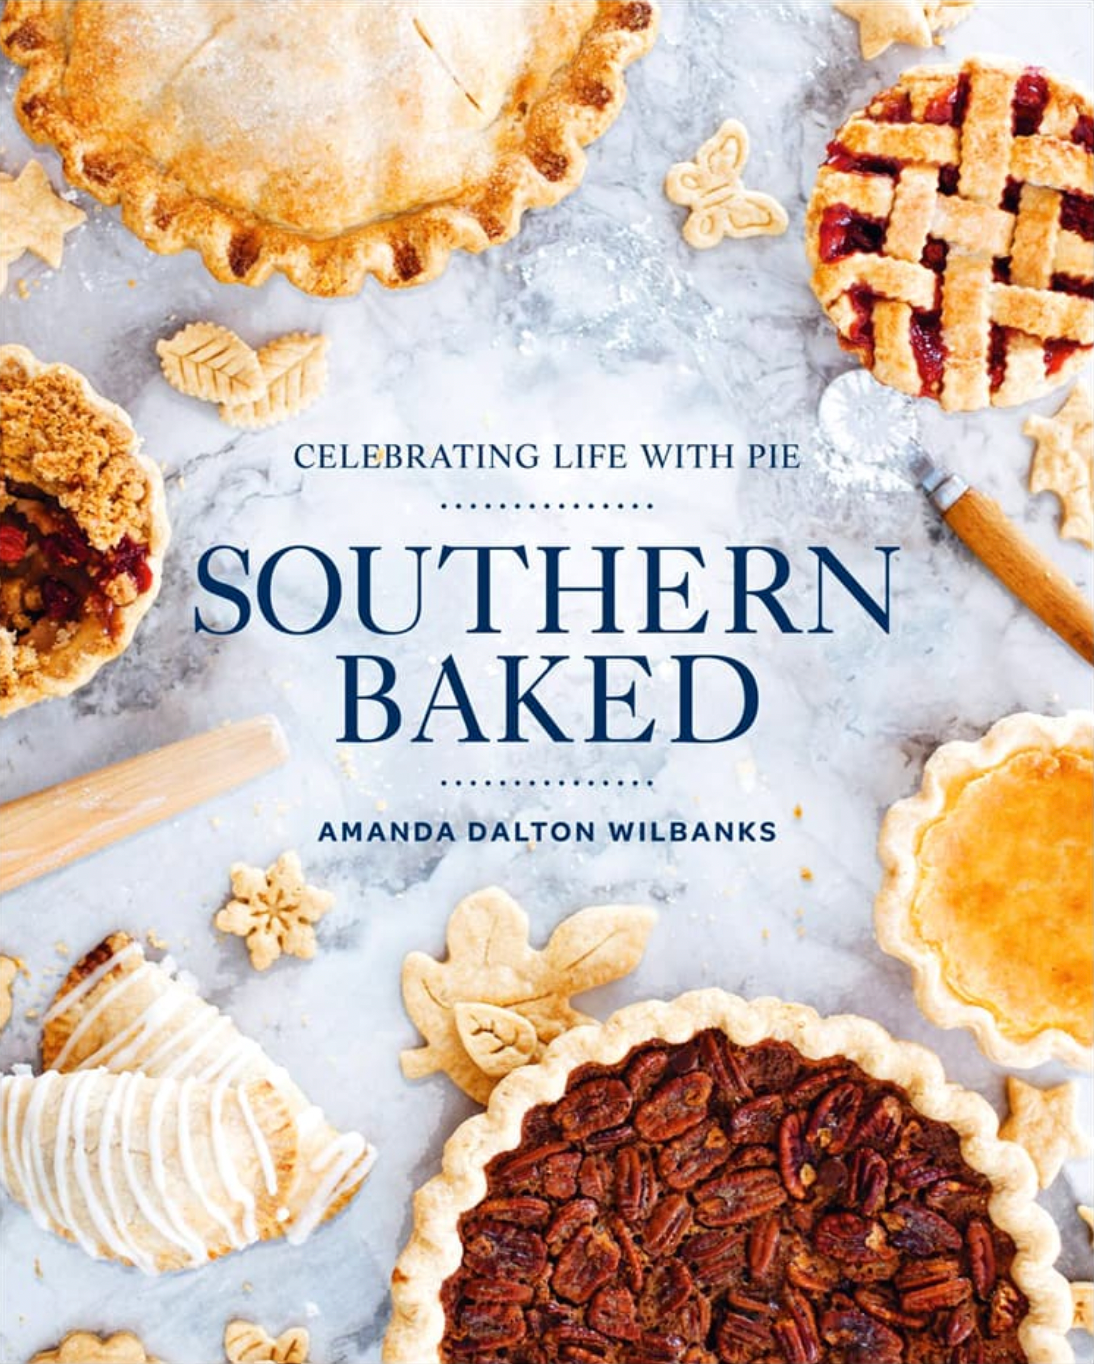 Southern Baked: Celebrating Life With Pie